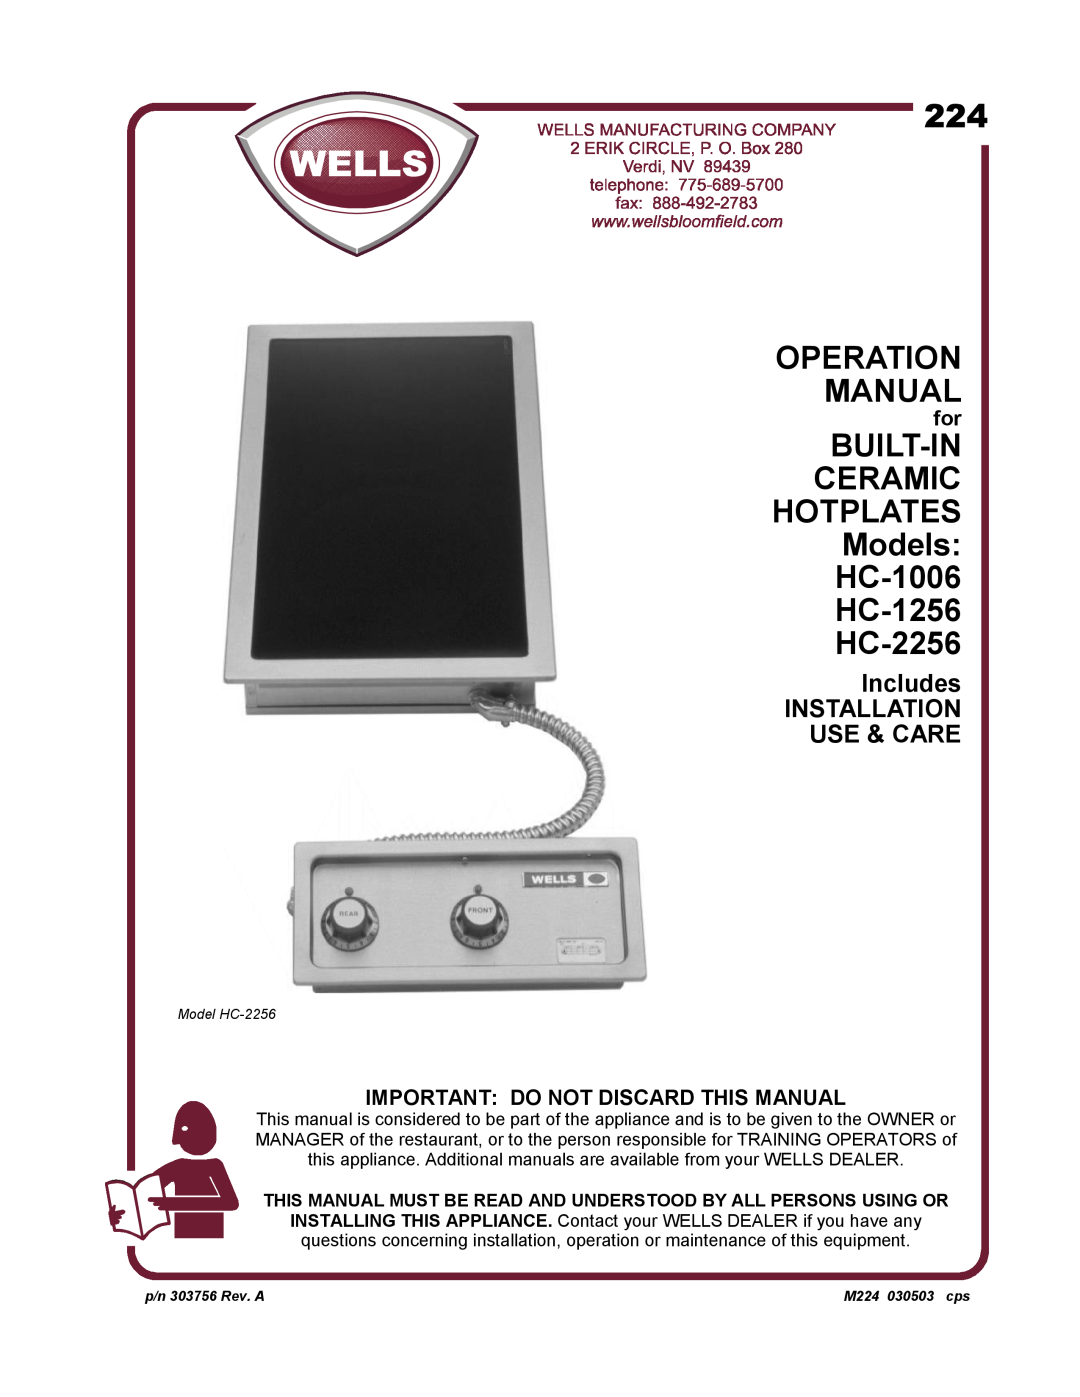 Wells HC-1256 operation manual Includes INSTALLATION USE & CARE, Important Do Not Discard This Manual, HC-2256 